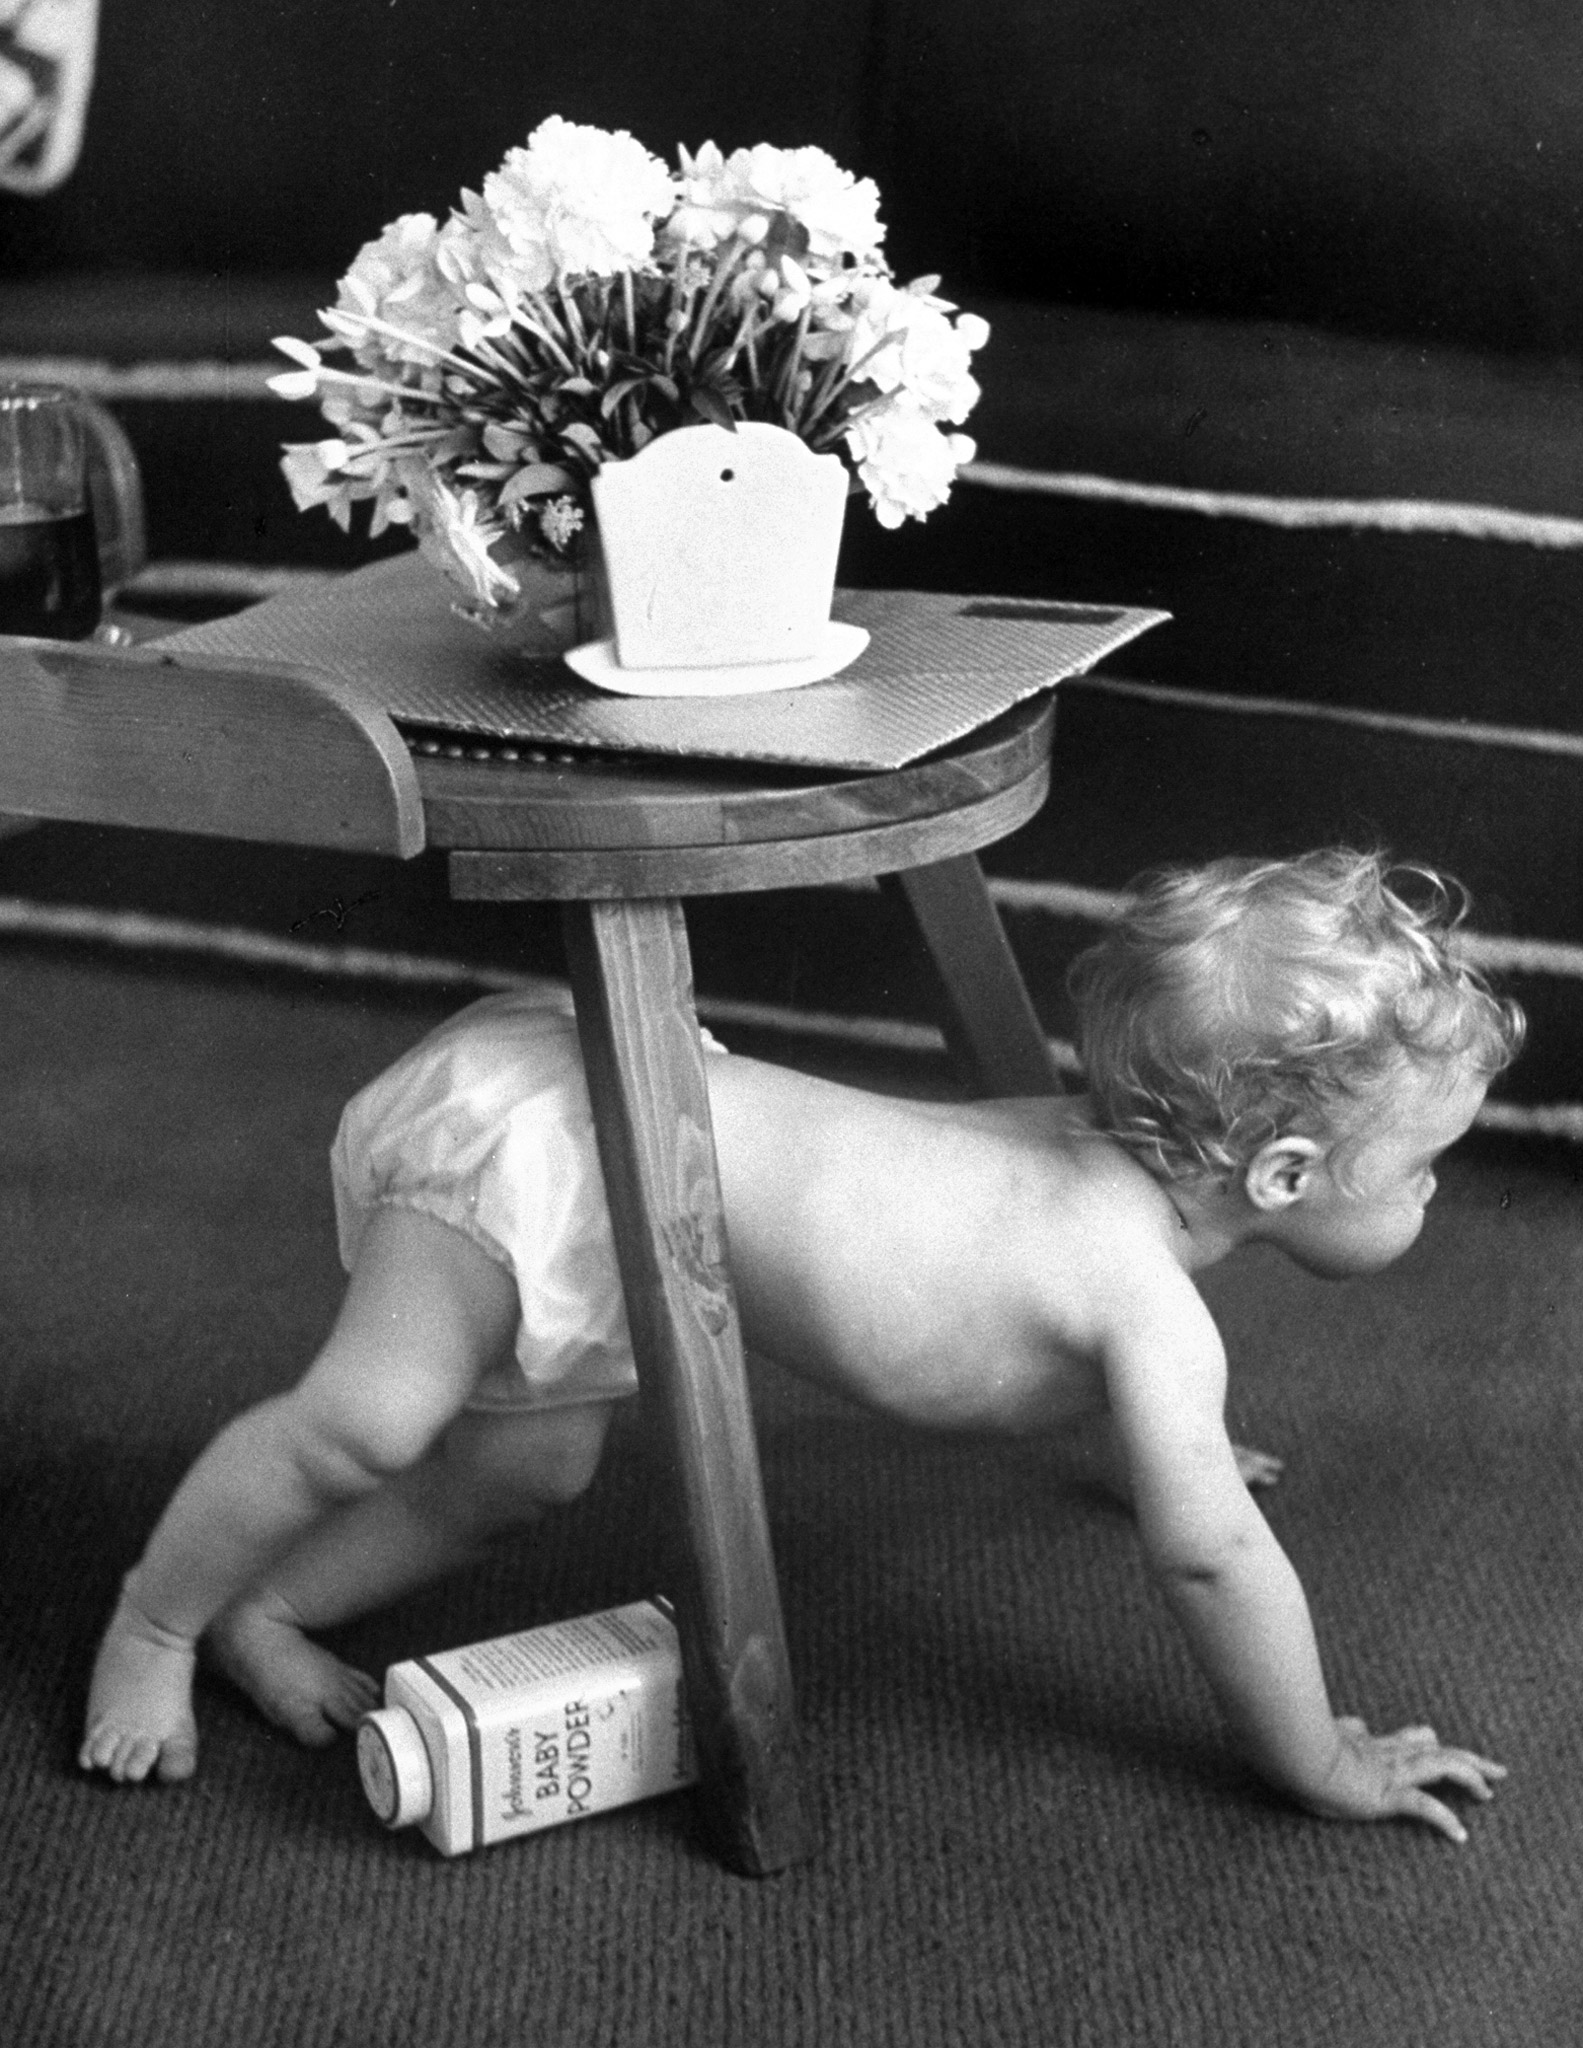 Exploring her house, Linda crawls under table. Flowers adorn gift music box which plays lullaby.